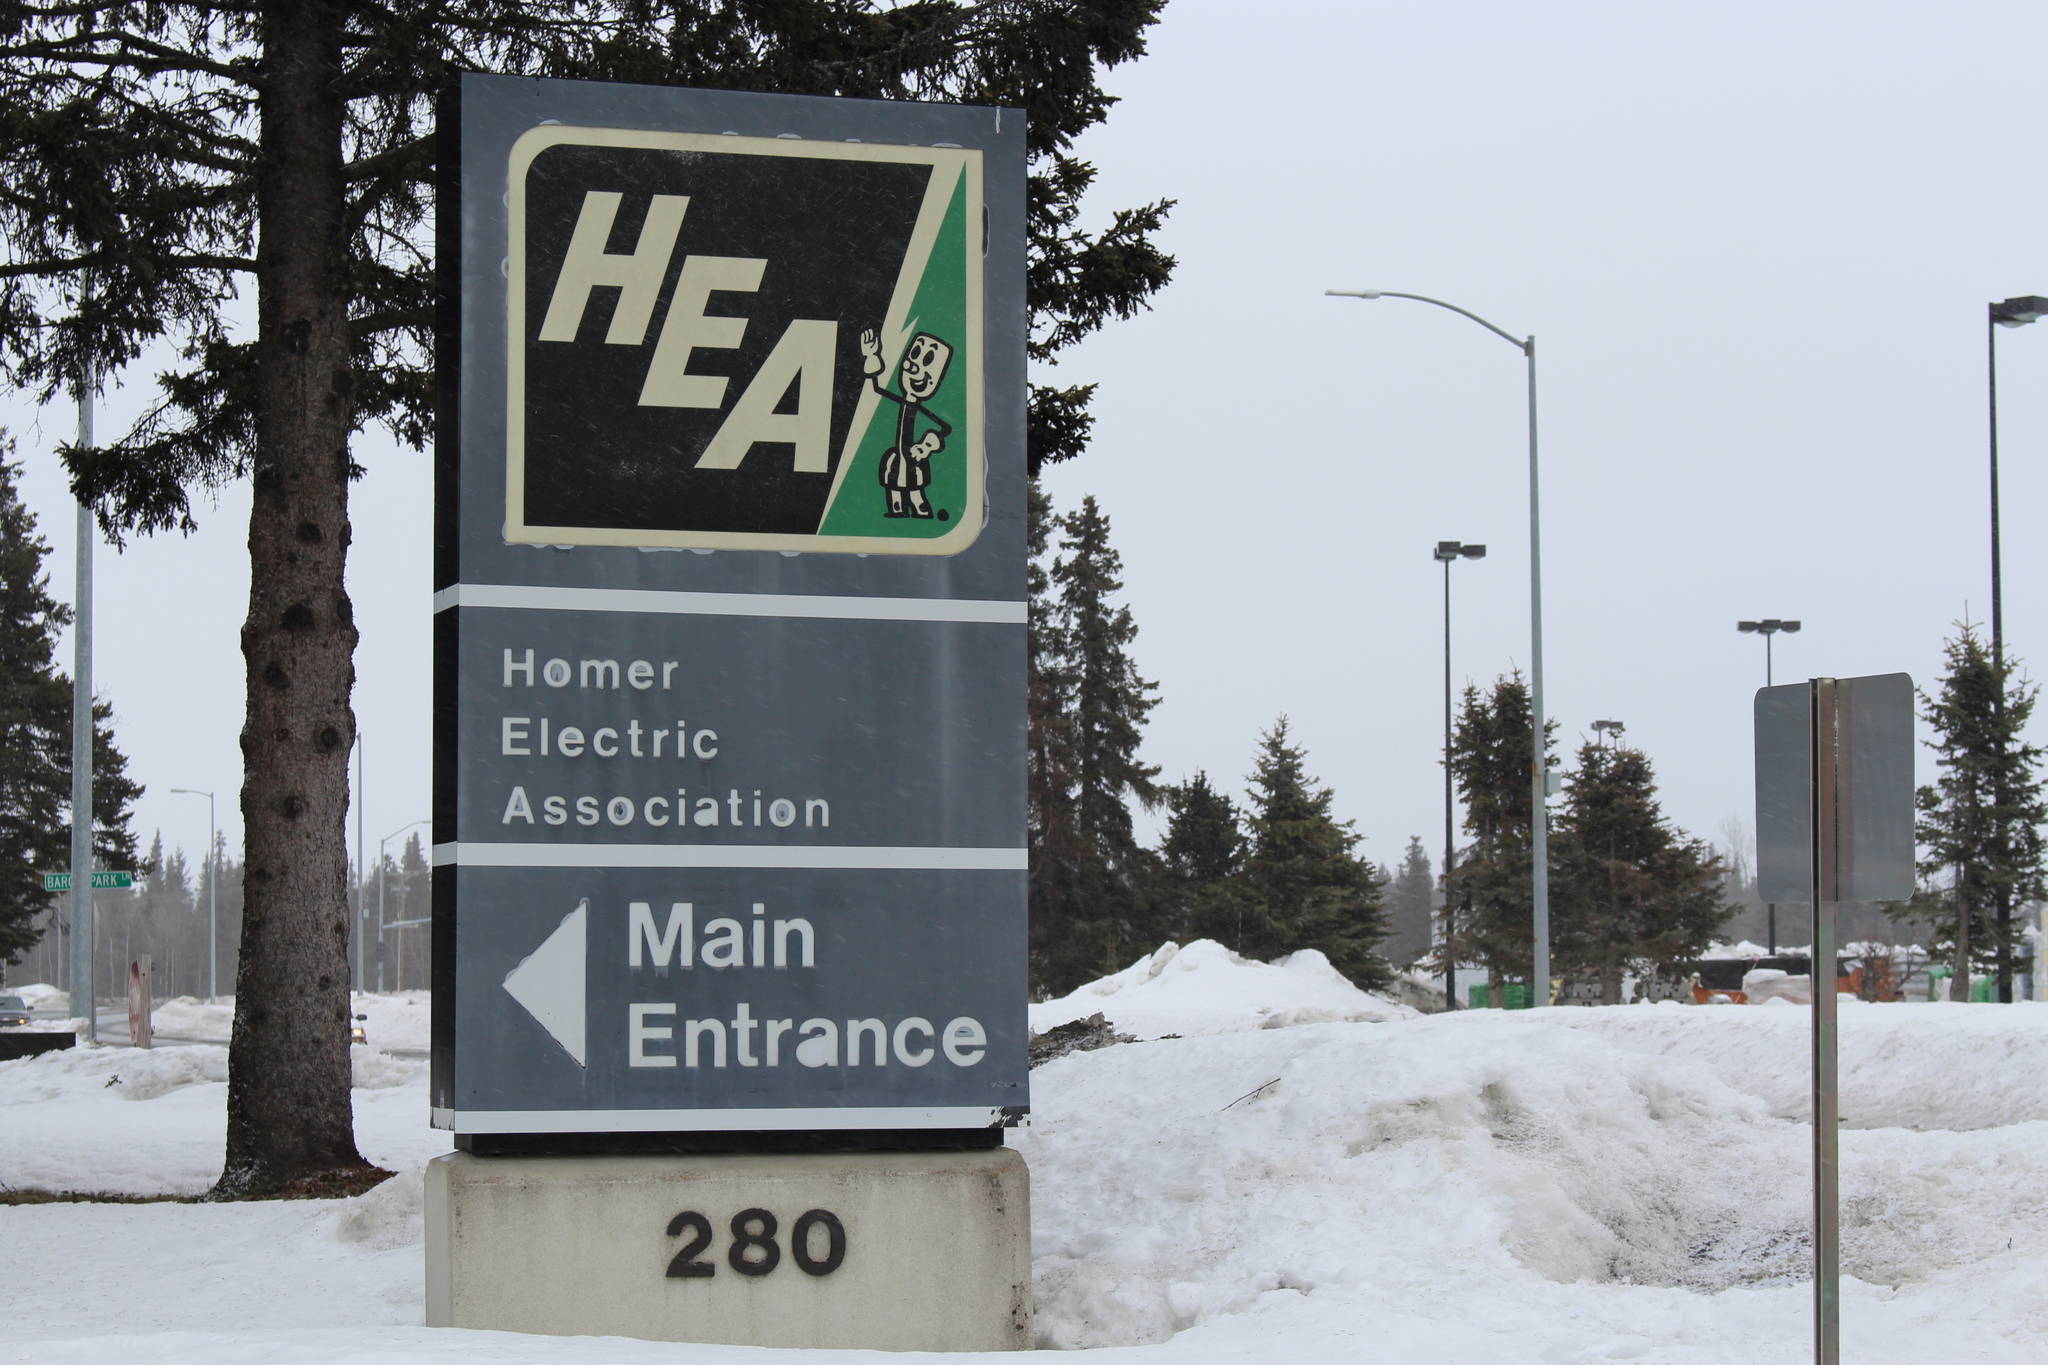 Photo by Brian Mazurek/Peninsula Clarion                                 The sign in front of the Homer Electric Association building in Kenai, Alaska, as seen on April 1, 2020.